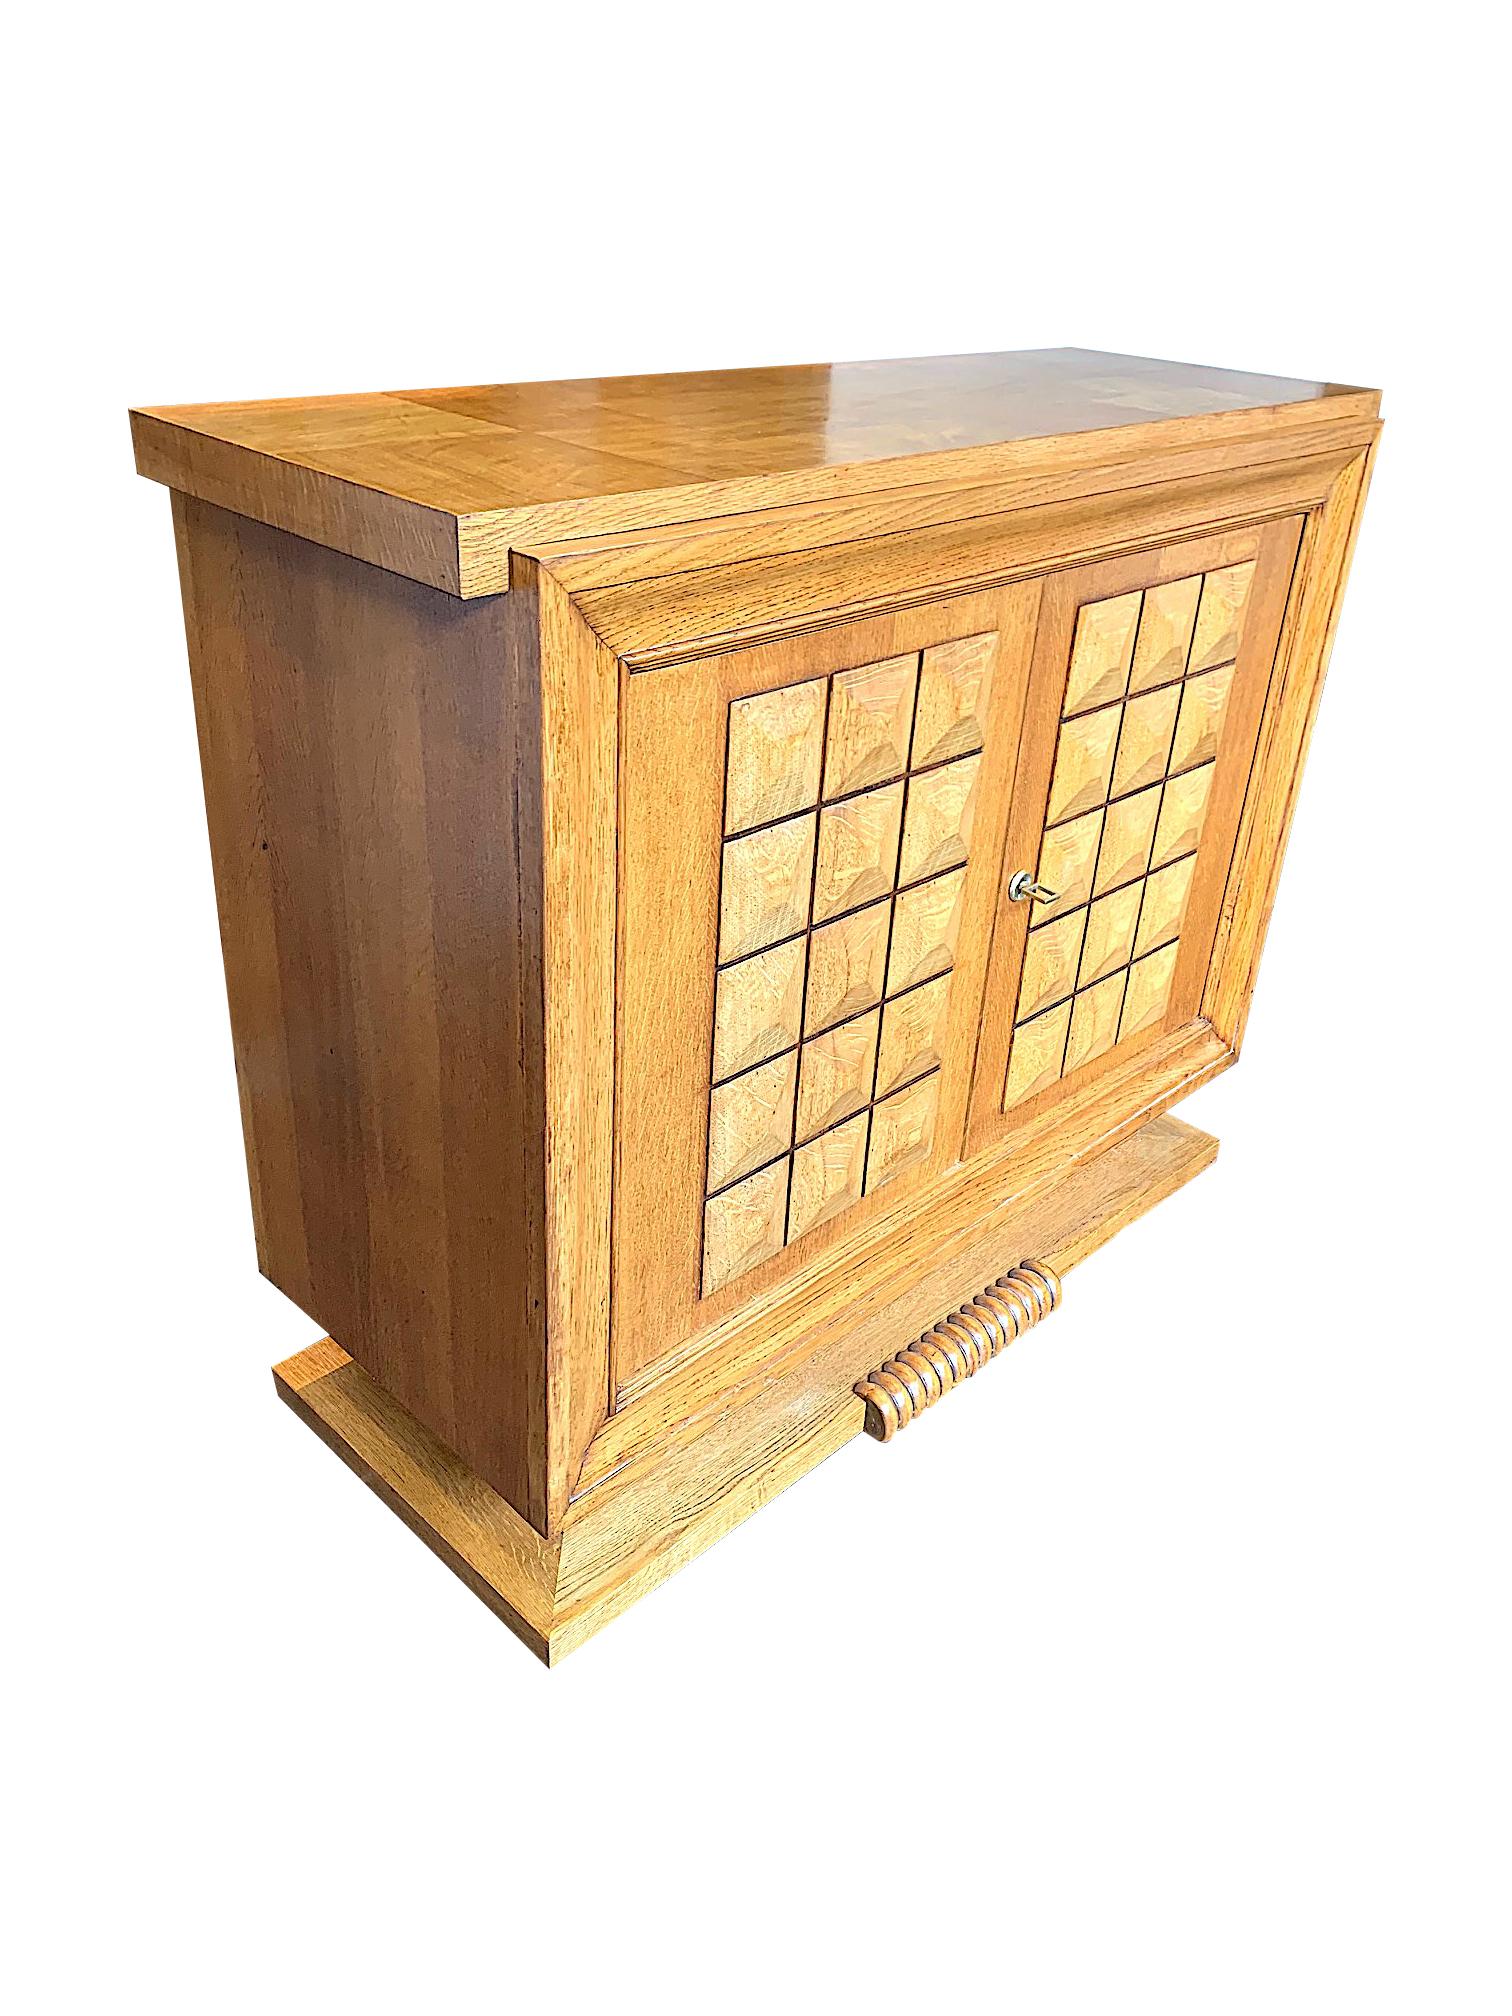 A French Art Deco two-door sideboard by Charles Dudouyt in light oak with wonderful geometric relief design on the doors, with orignal brass key and lock detail. Mounted on an oak plinth with circular central scroll. The oak top has an interesting